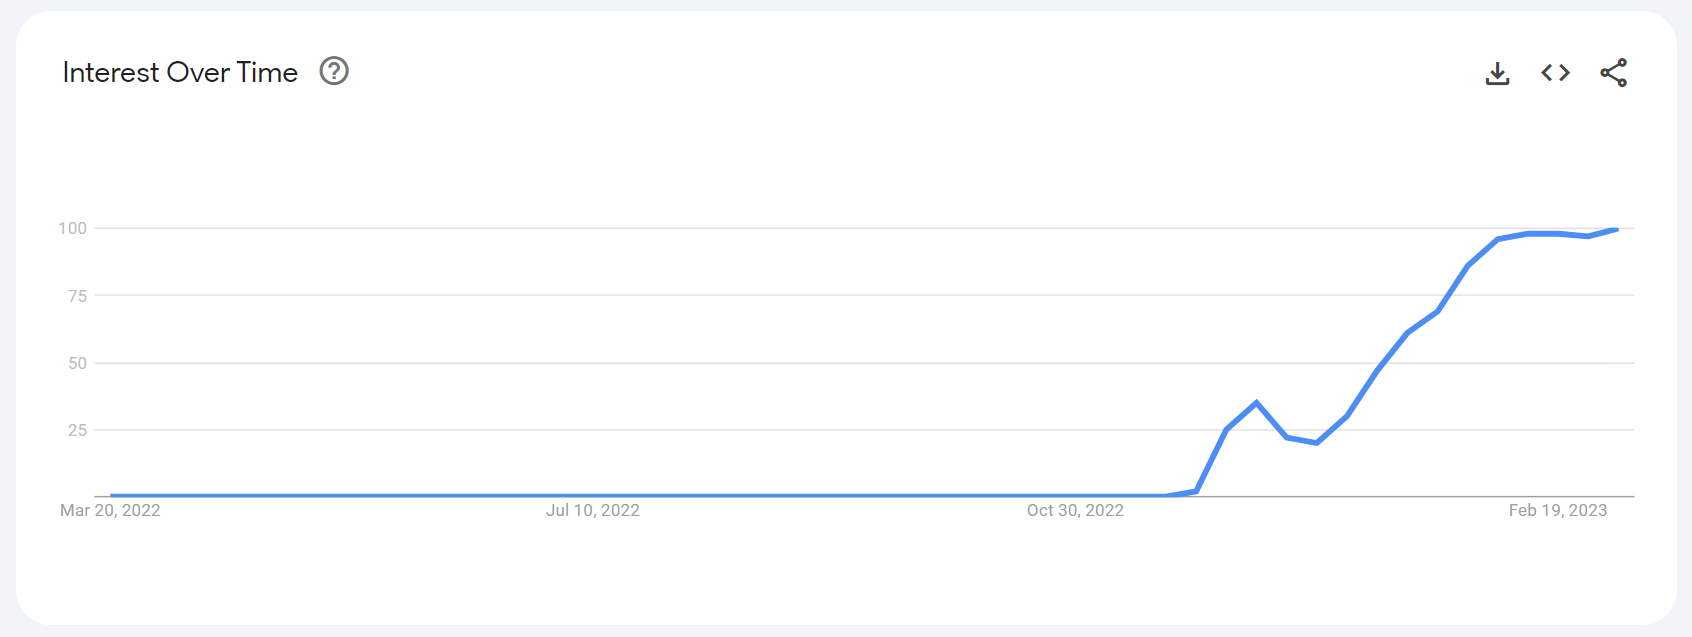 Google Trends shows a spike in searches for ChatGPT and “large language model” near the end of 2022. Image credit: Google Trends